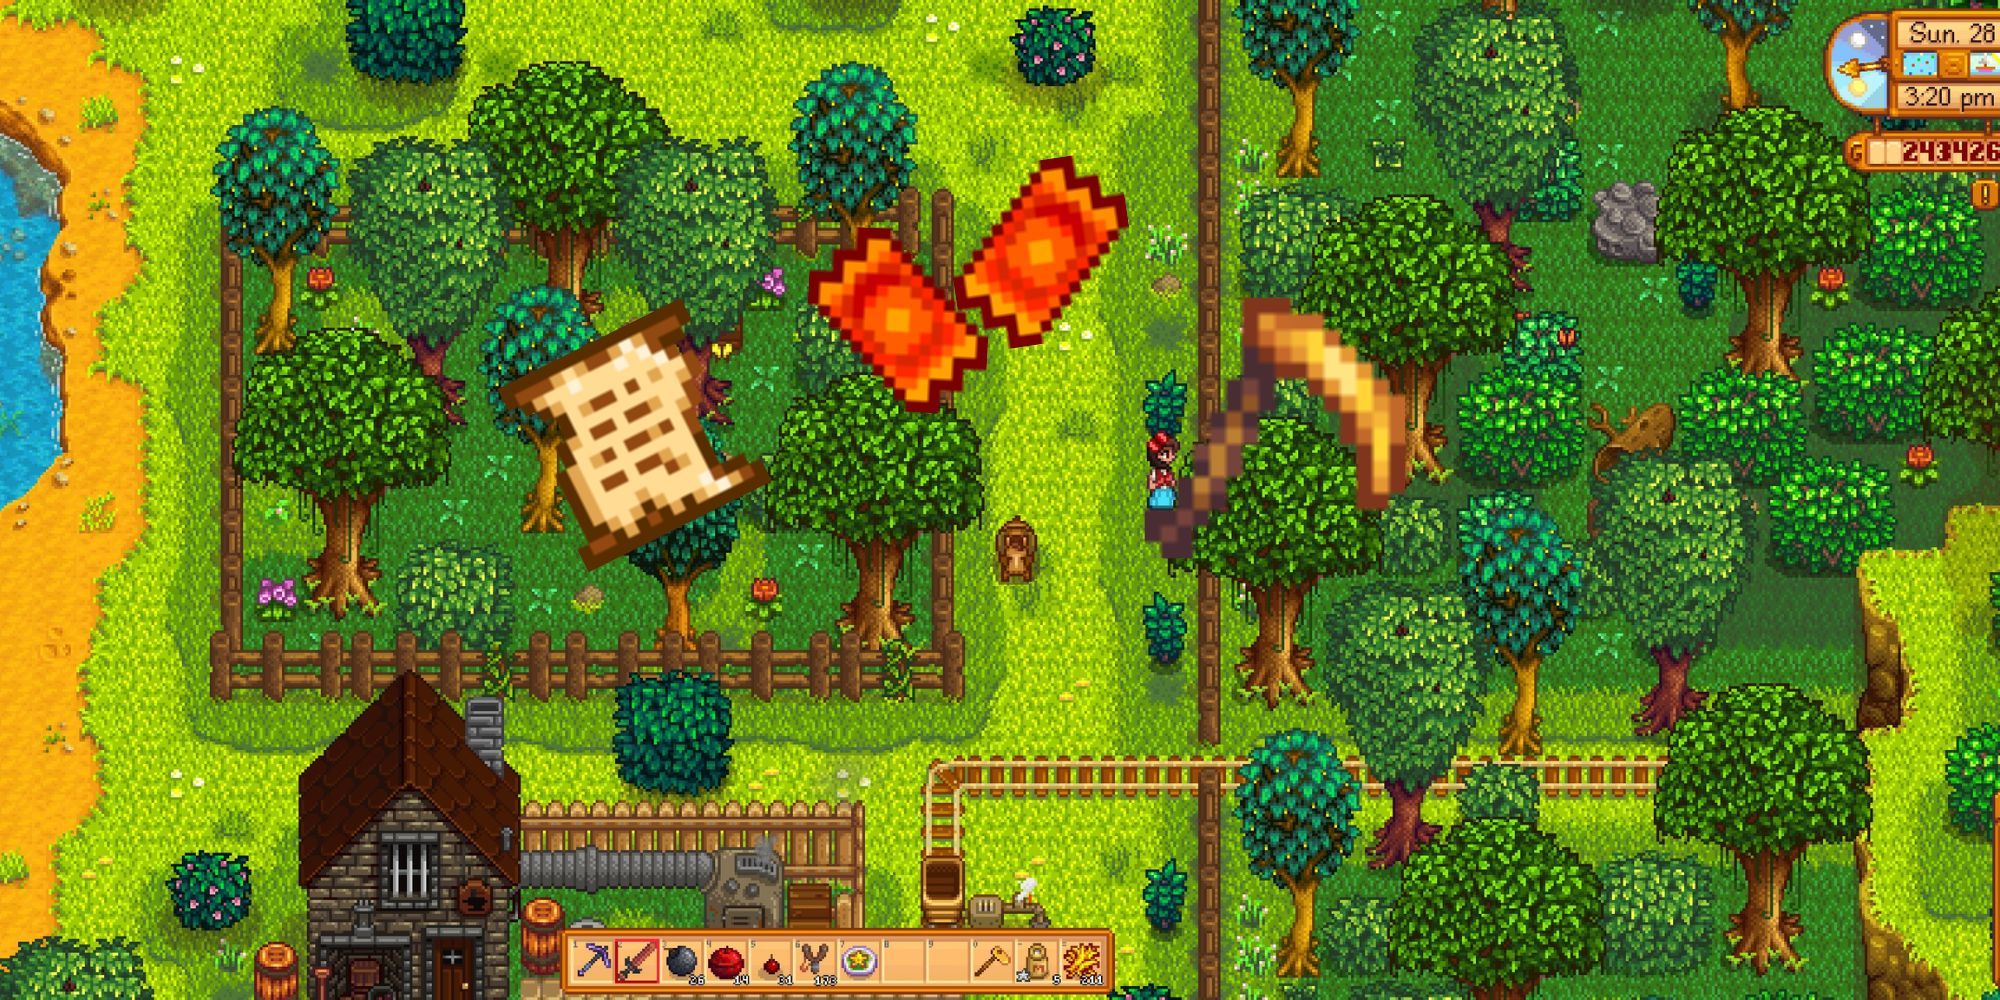 Stardew Valley: An image of a secret note, two prize tickets, and a golden scythe over a screenshot of the Alleyway Buffet path